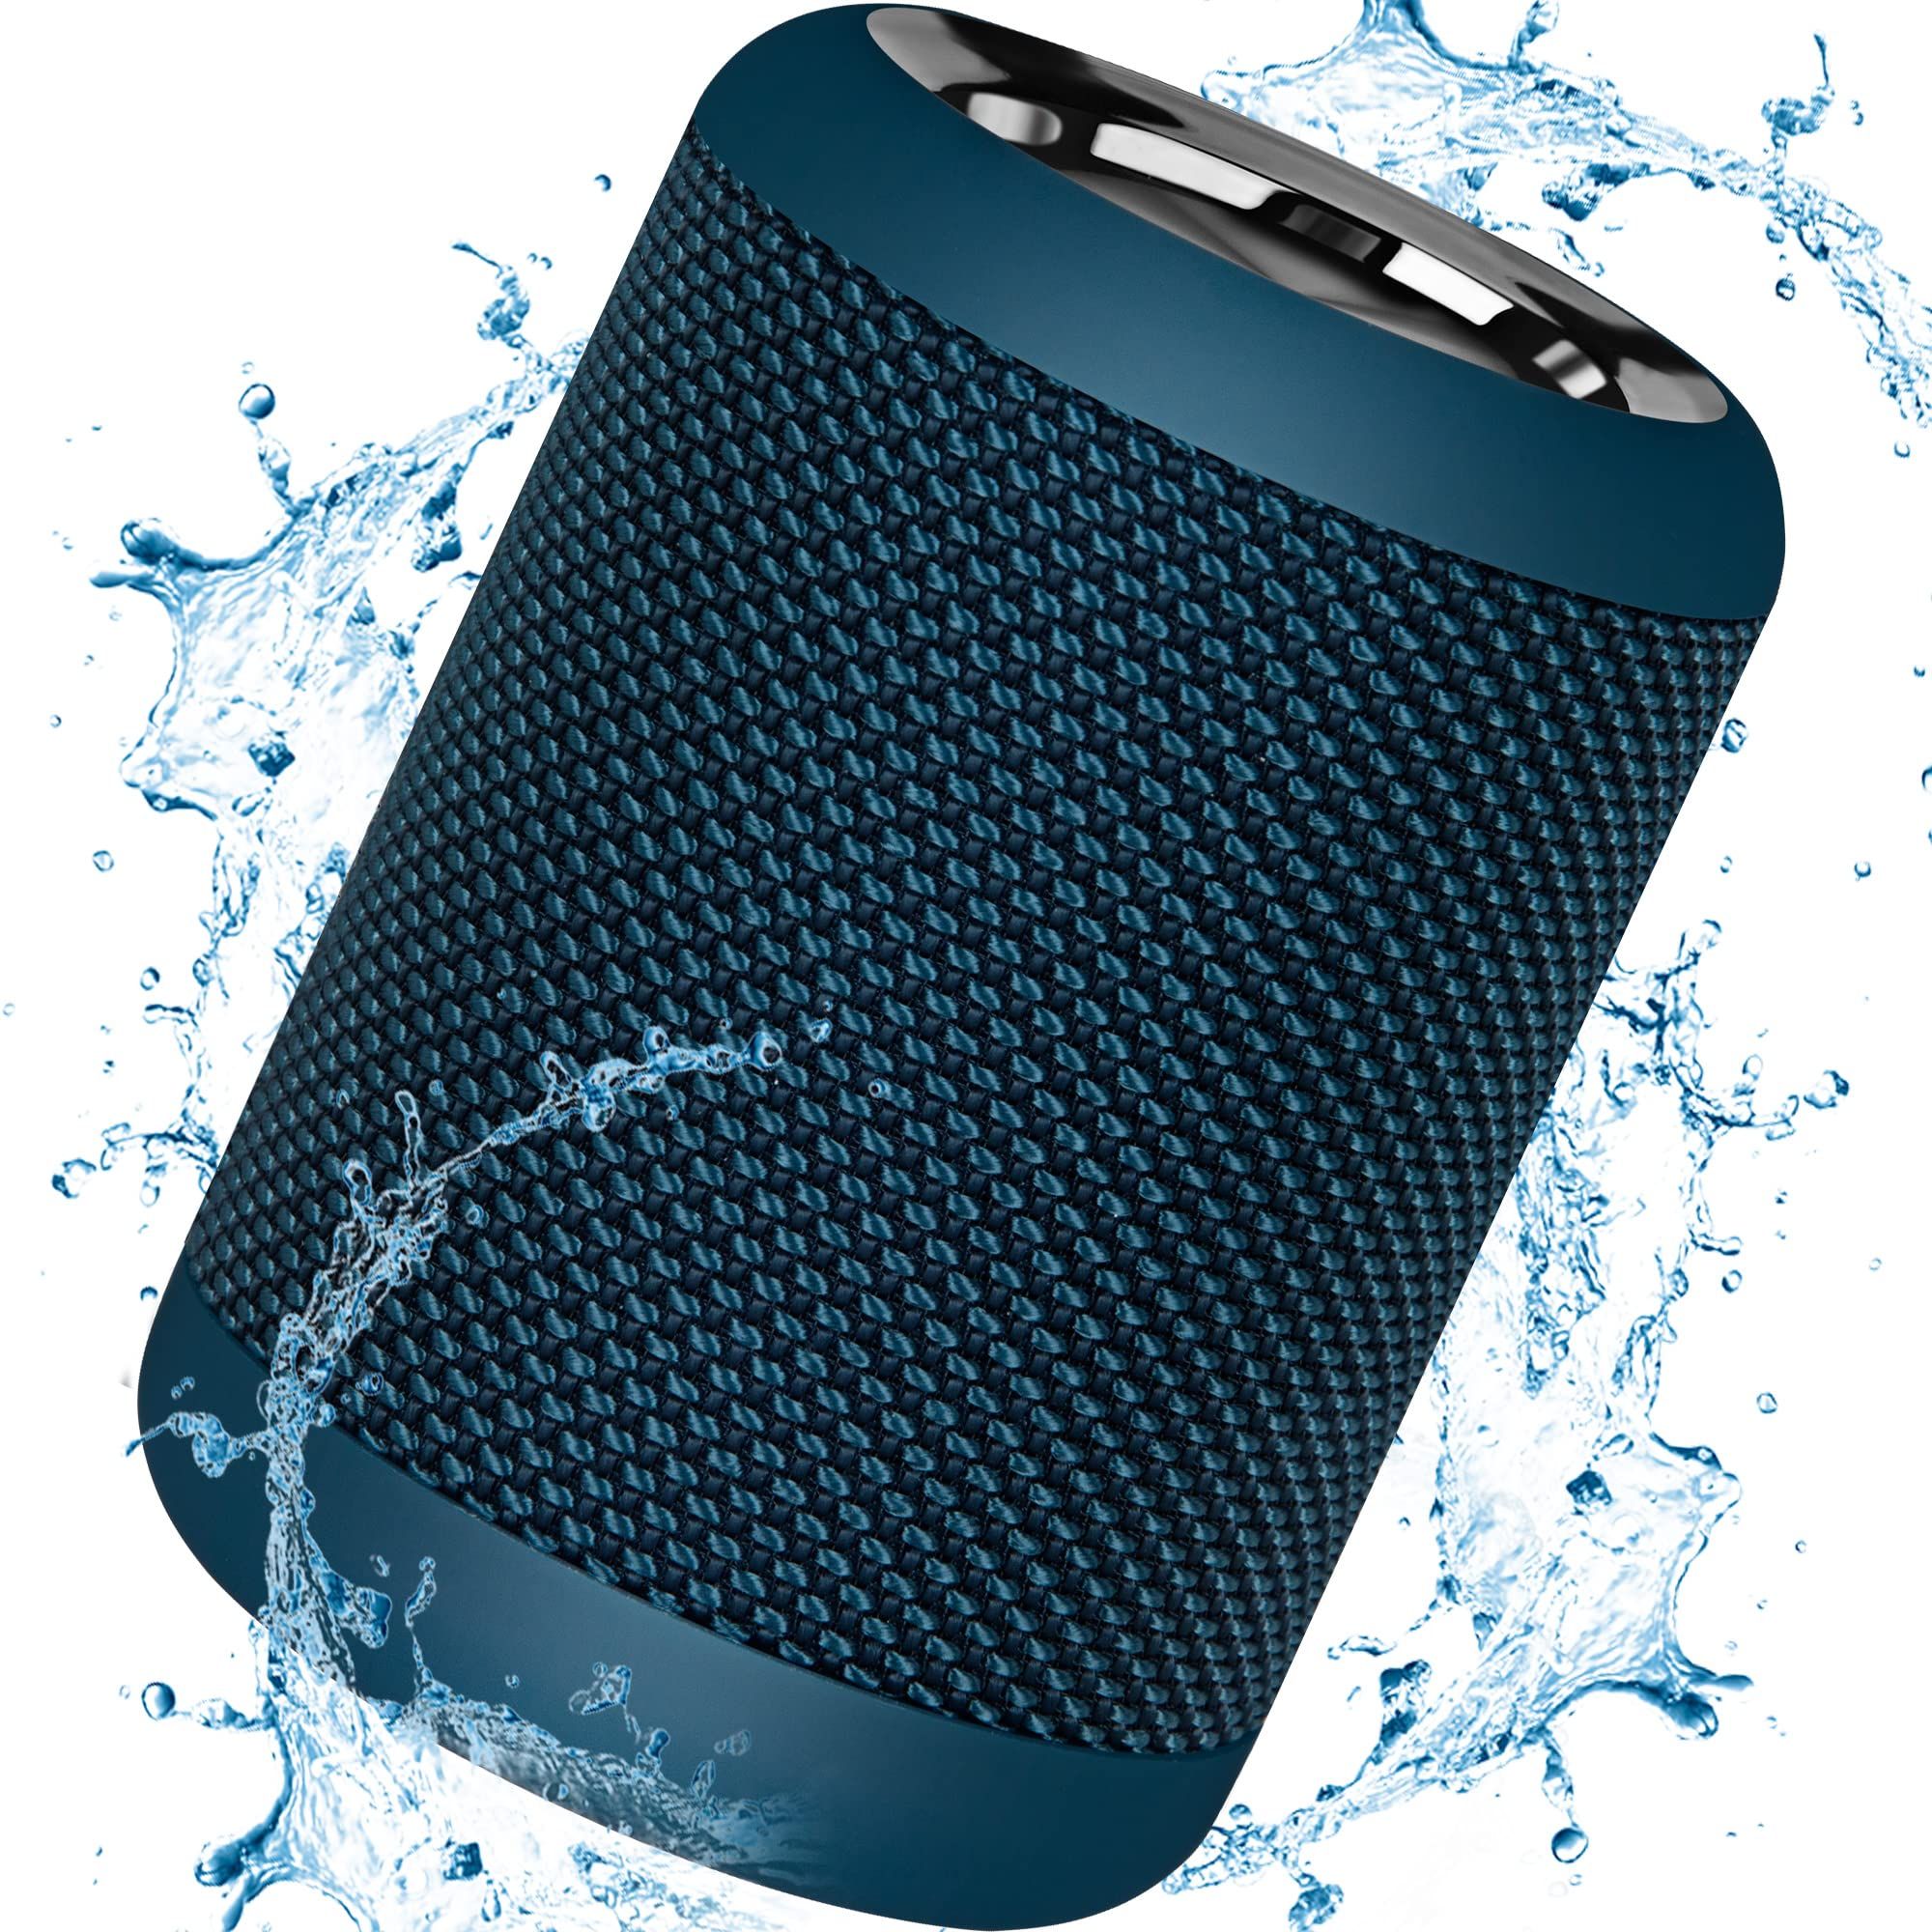 MAWODE T10 Portable Bluetooth Speakers, ABS Materials IPX5 Waterproof Dual Pairing Fabric 8 Hours Pl | Amazon (US)